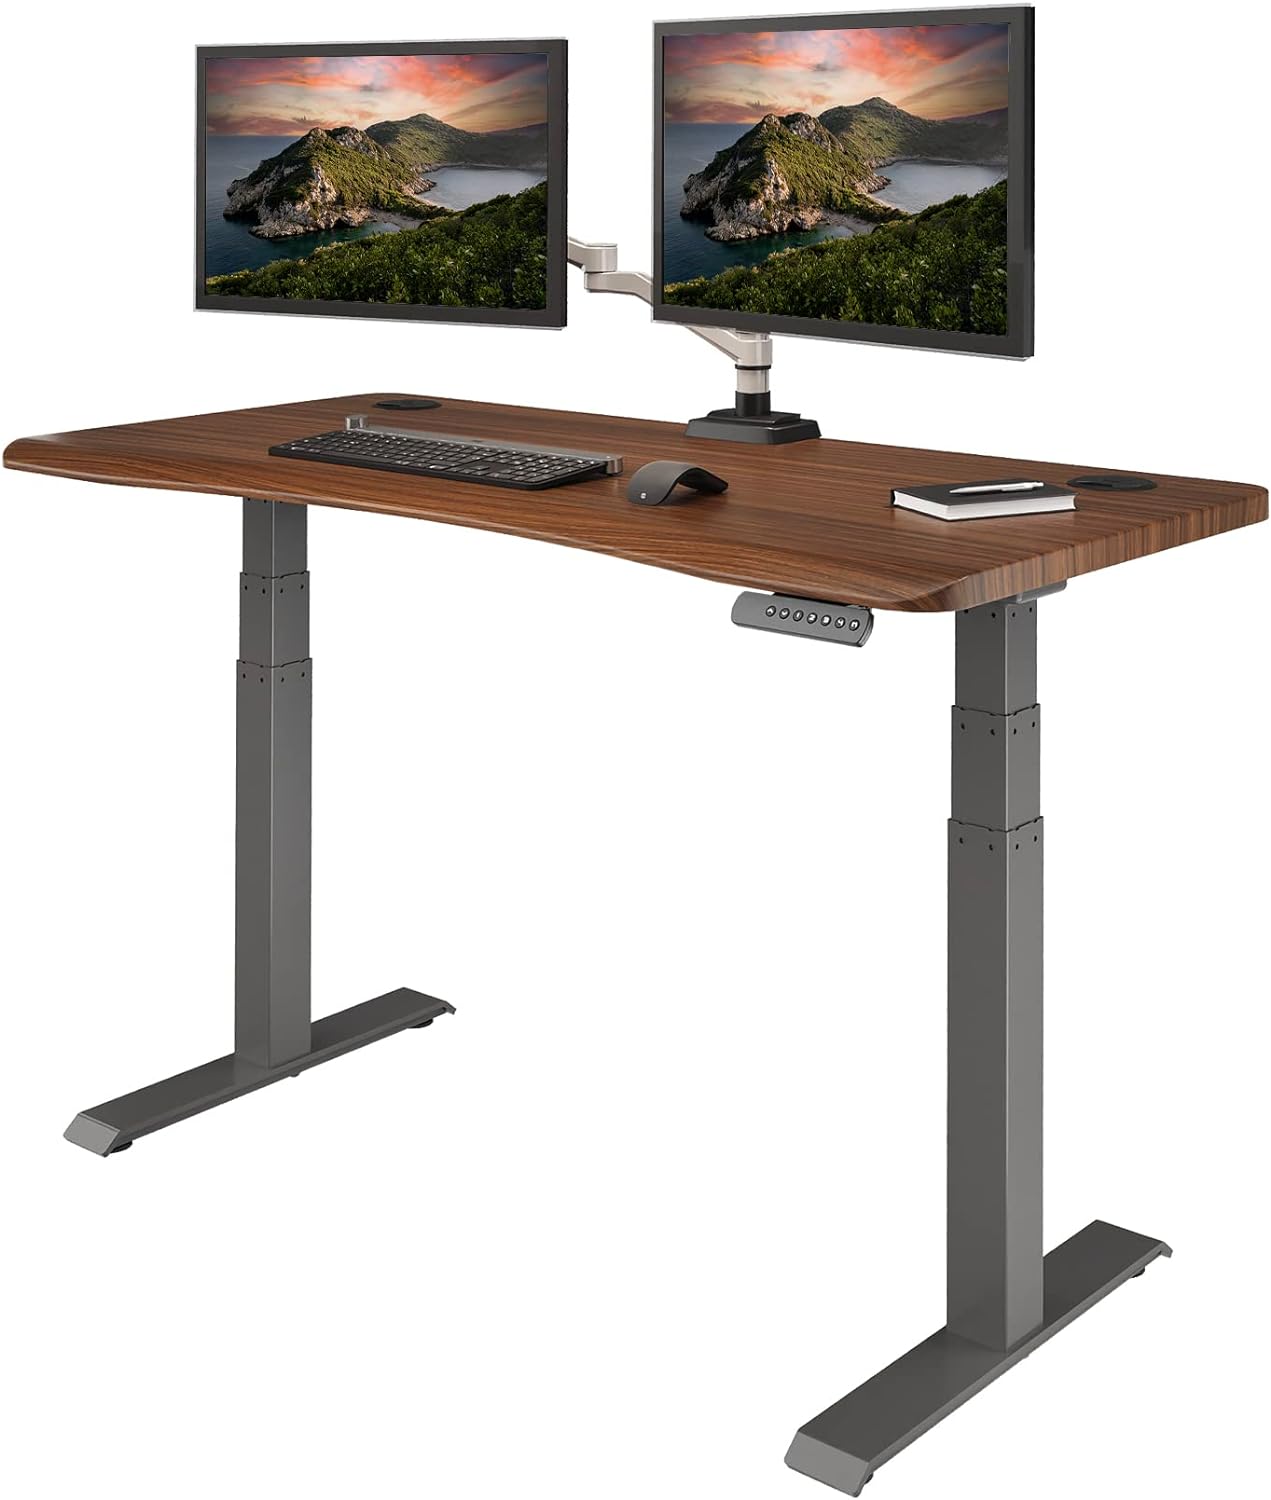 Standing Desk 54X26 - Ergonomic Curved Edge Electric Sit Stand Adjustable Desk - Sit Stand Desk for Gaming or Home Office – Stand up Desk - Dark Wood